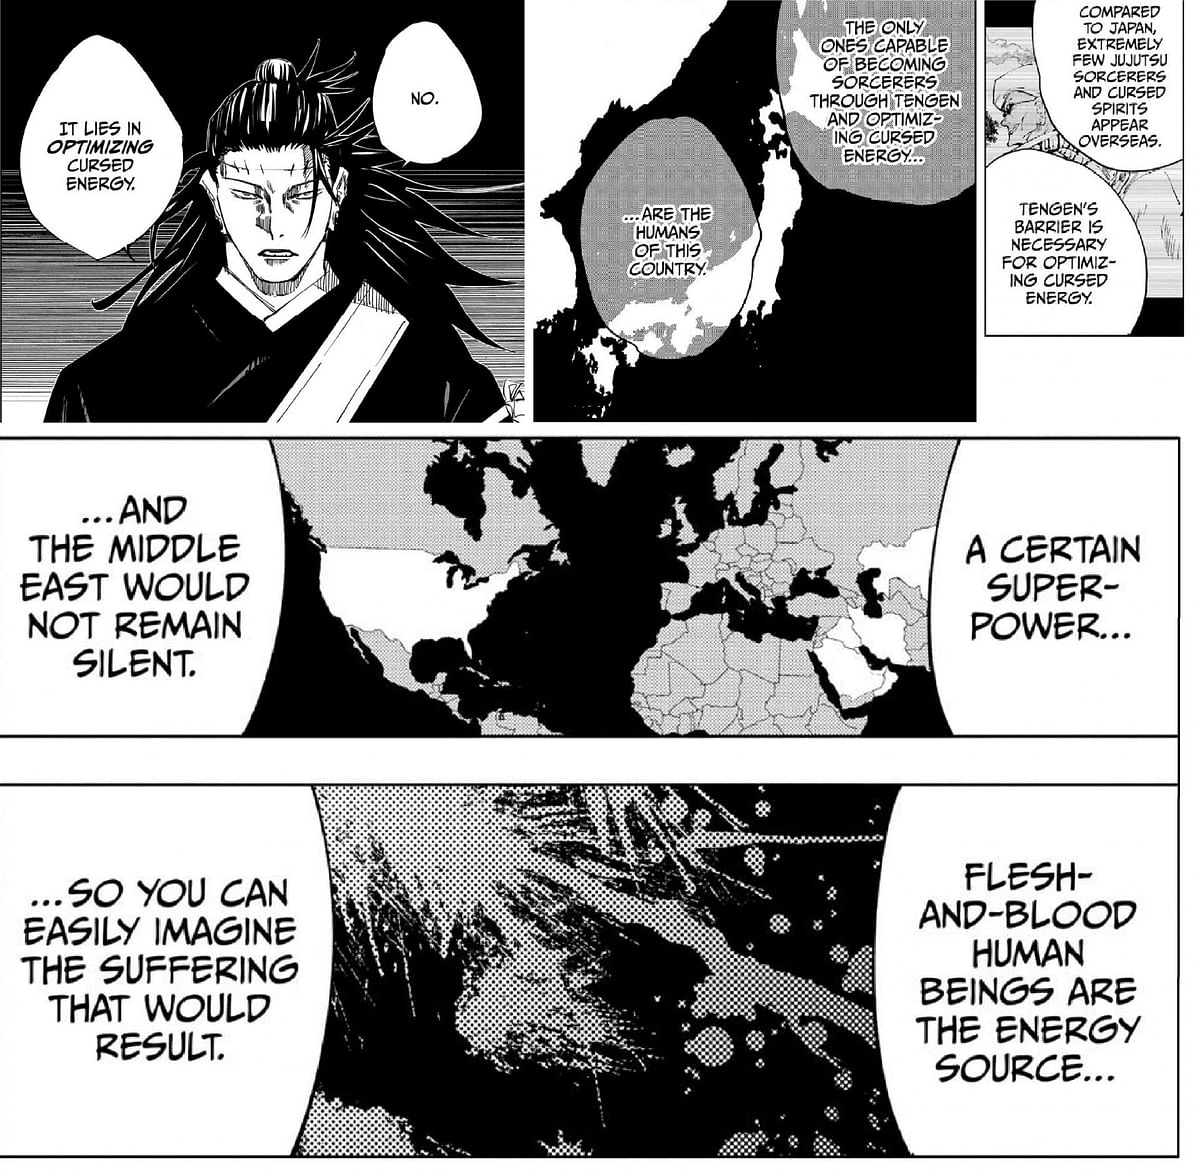 Jujutsu Kaisen What Is Cursed Energy Explained 5789